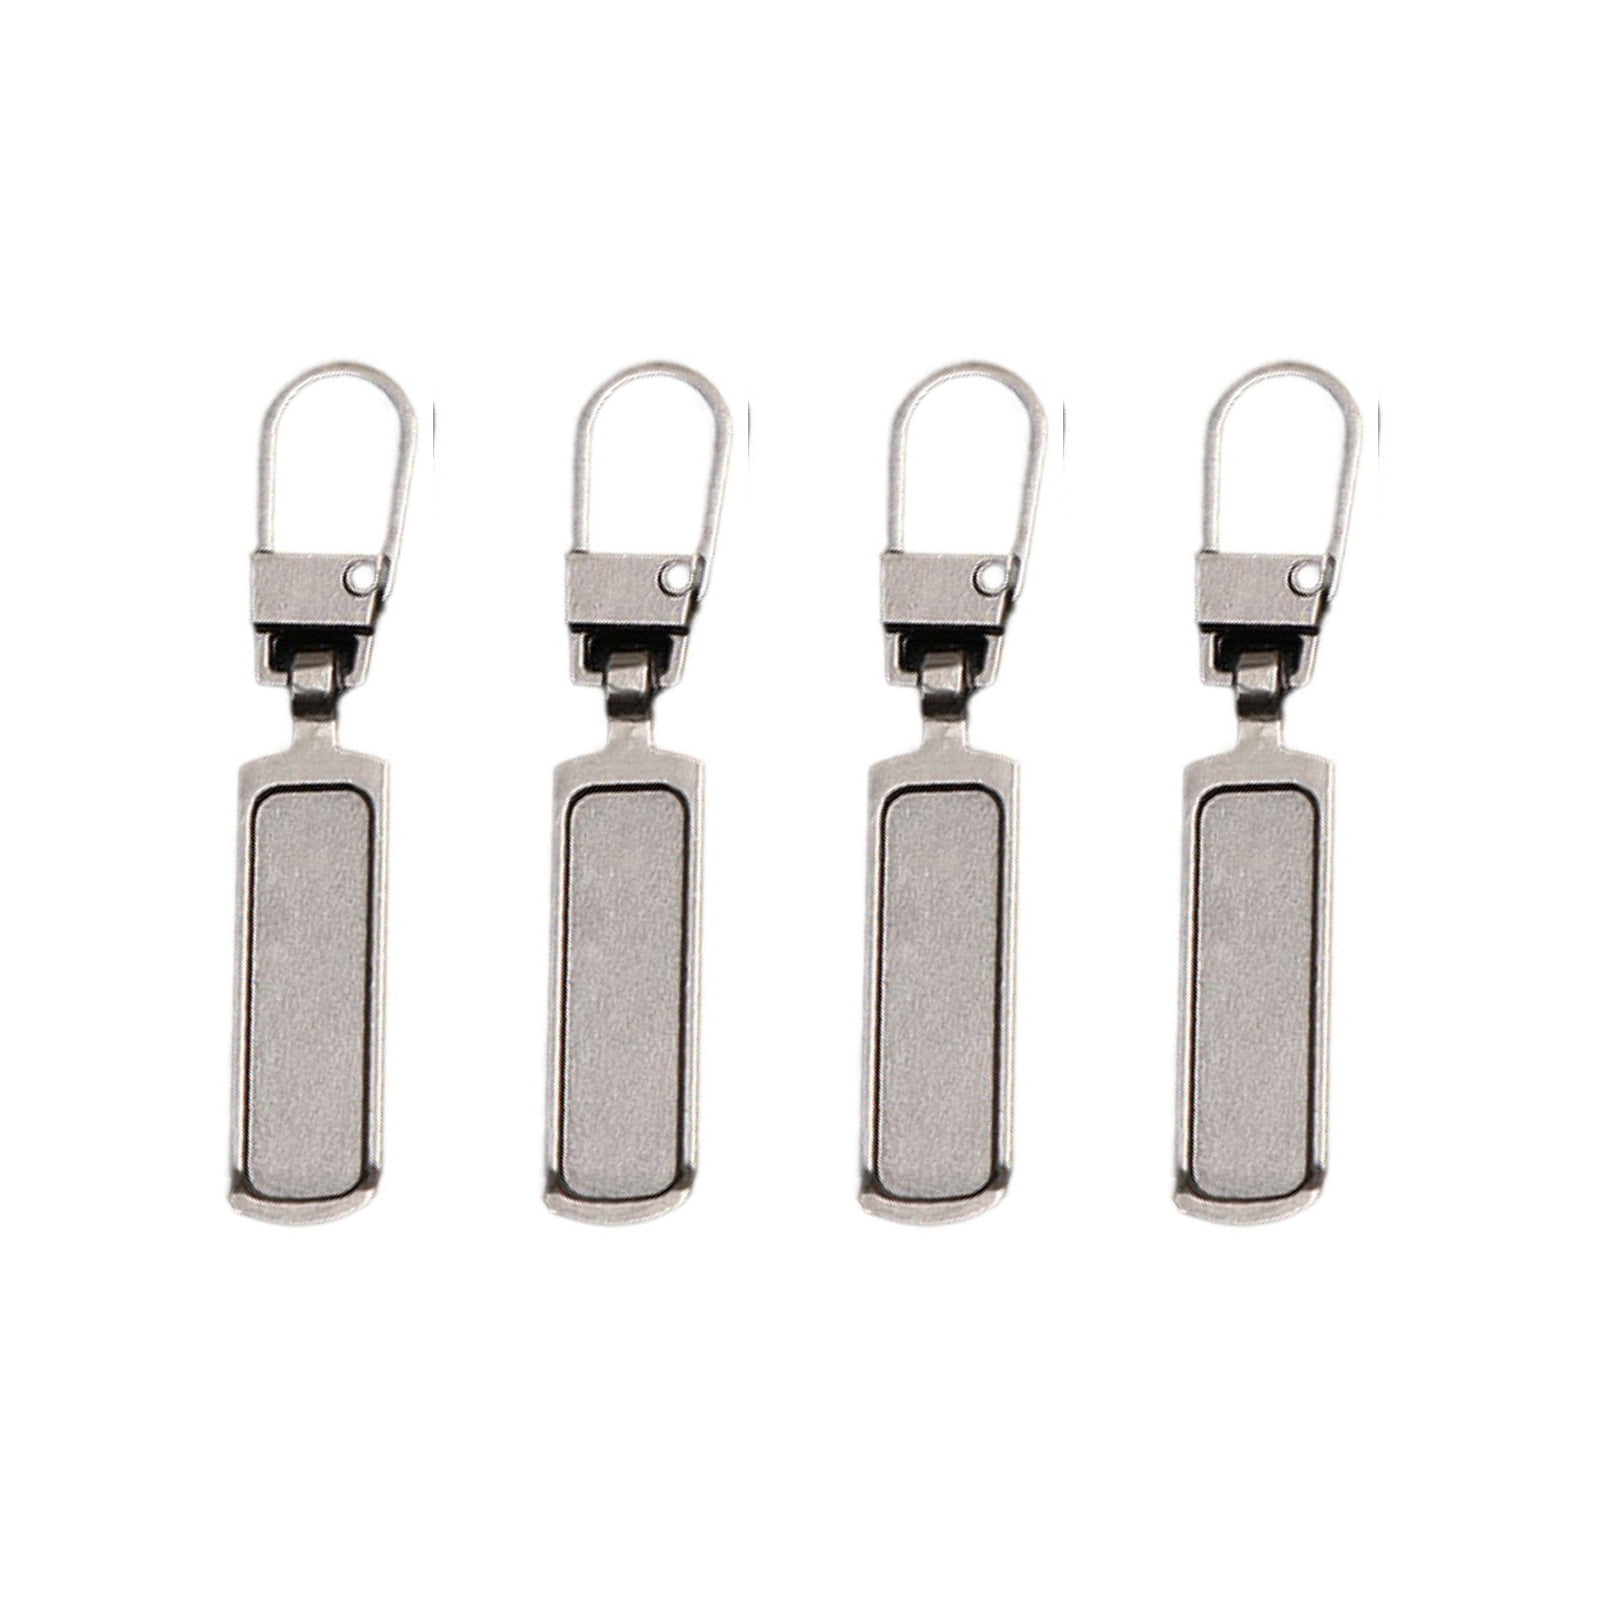  Double Opening Zipper Pull Replacement - 4 PCS